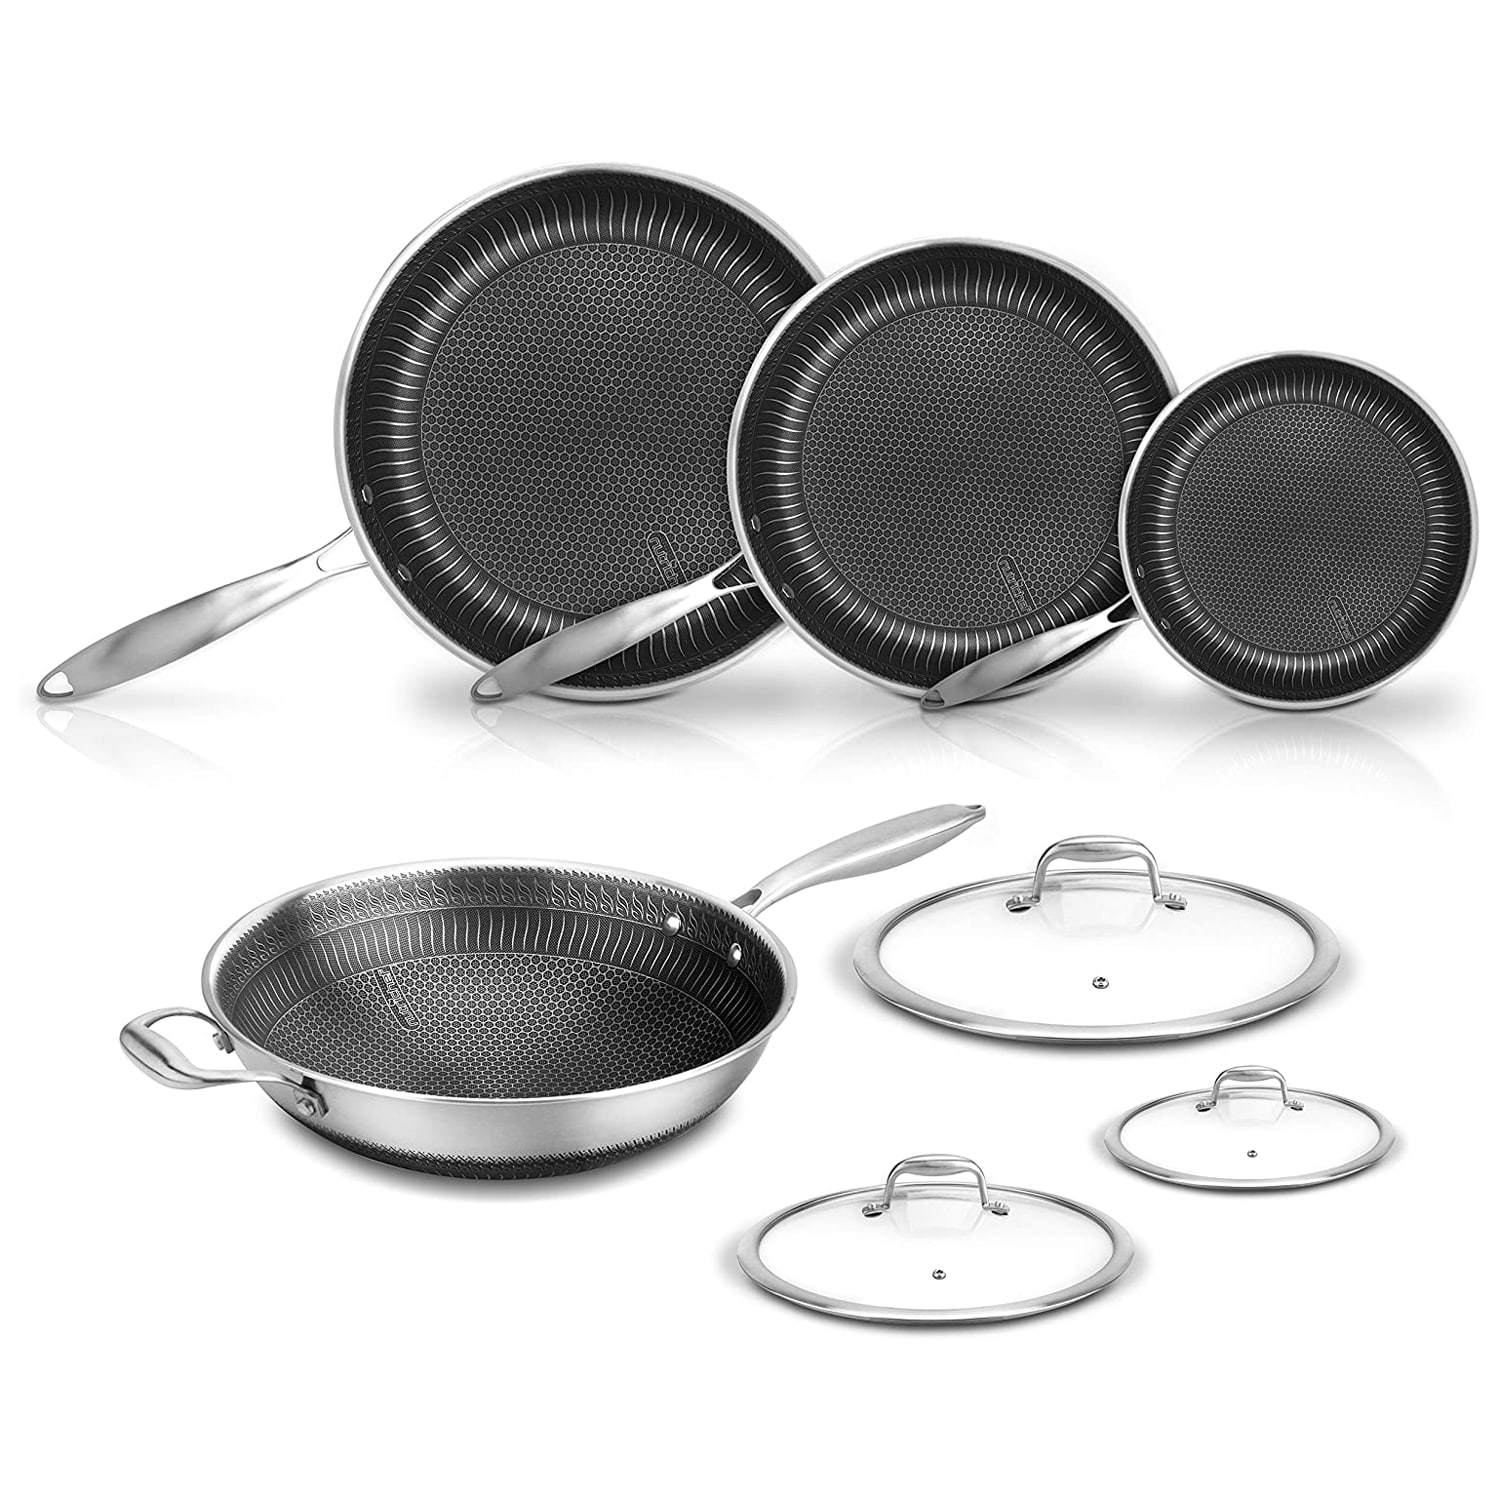 Beloved-by-chefs All-Clad frying pan sets are up to 50% off right now